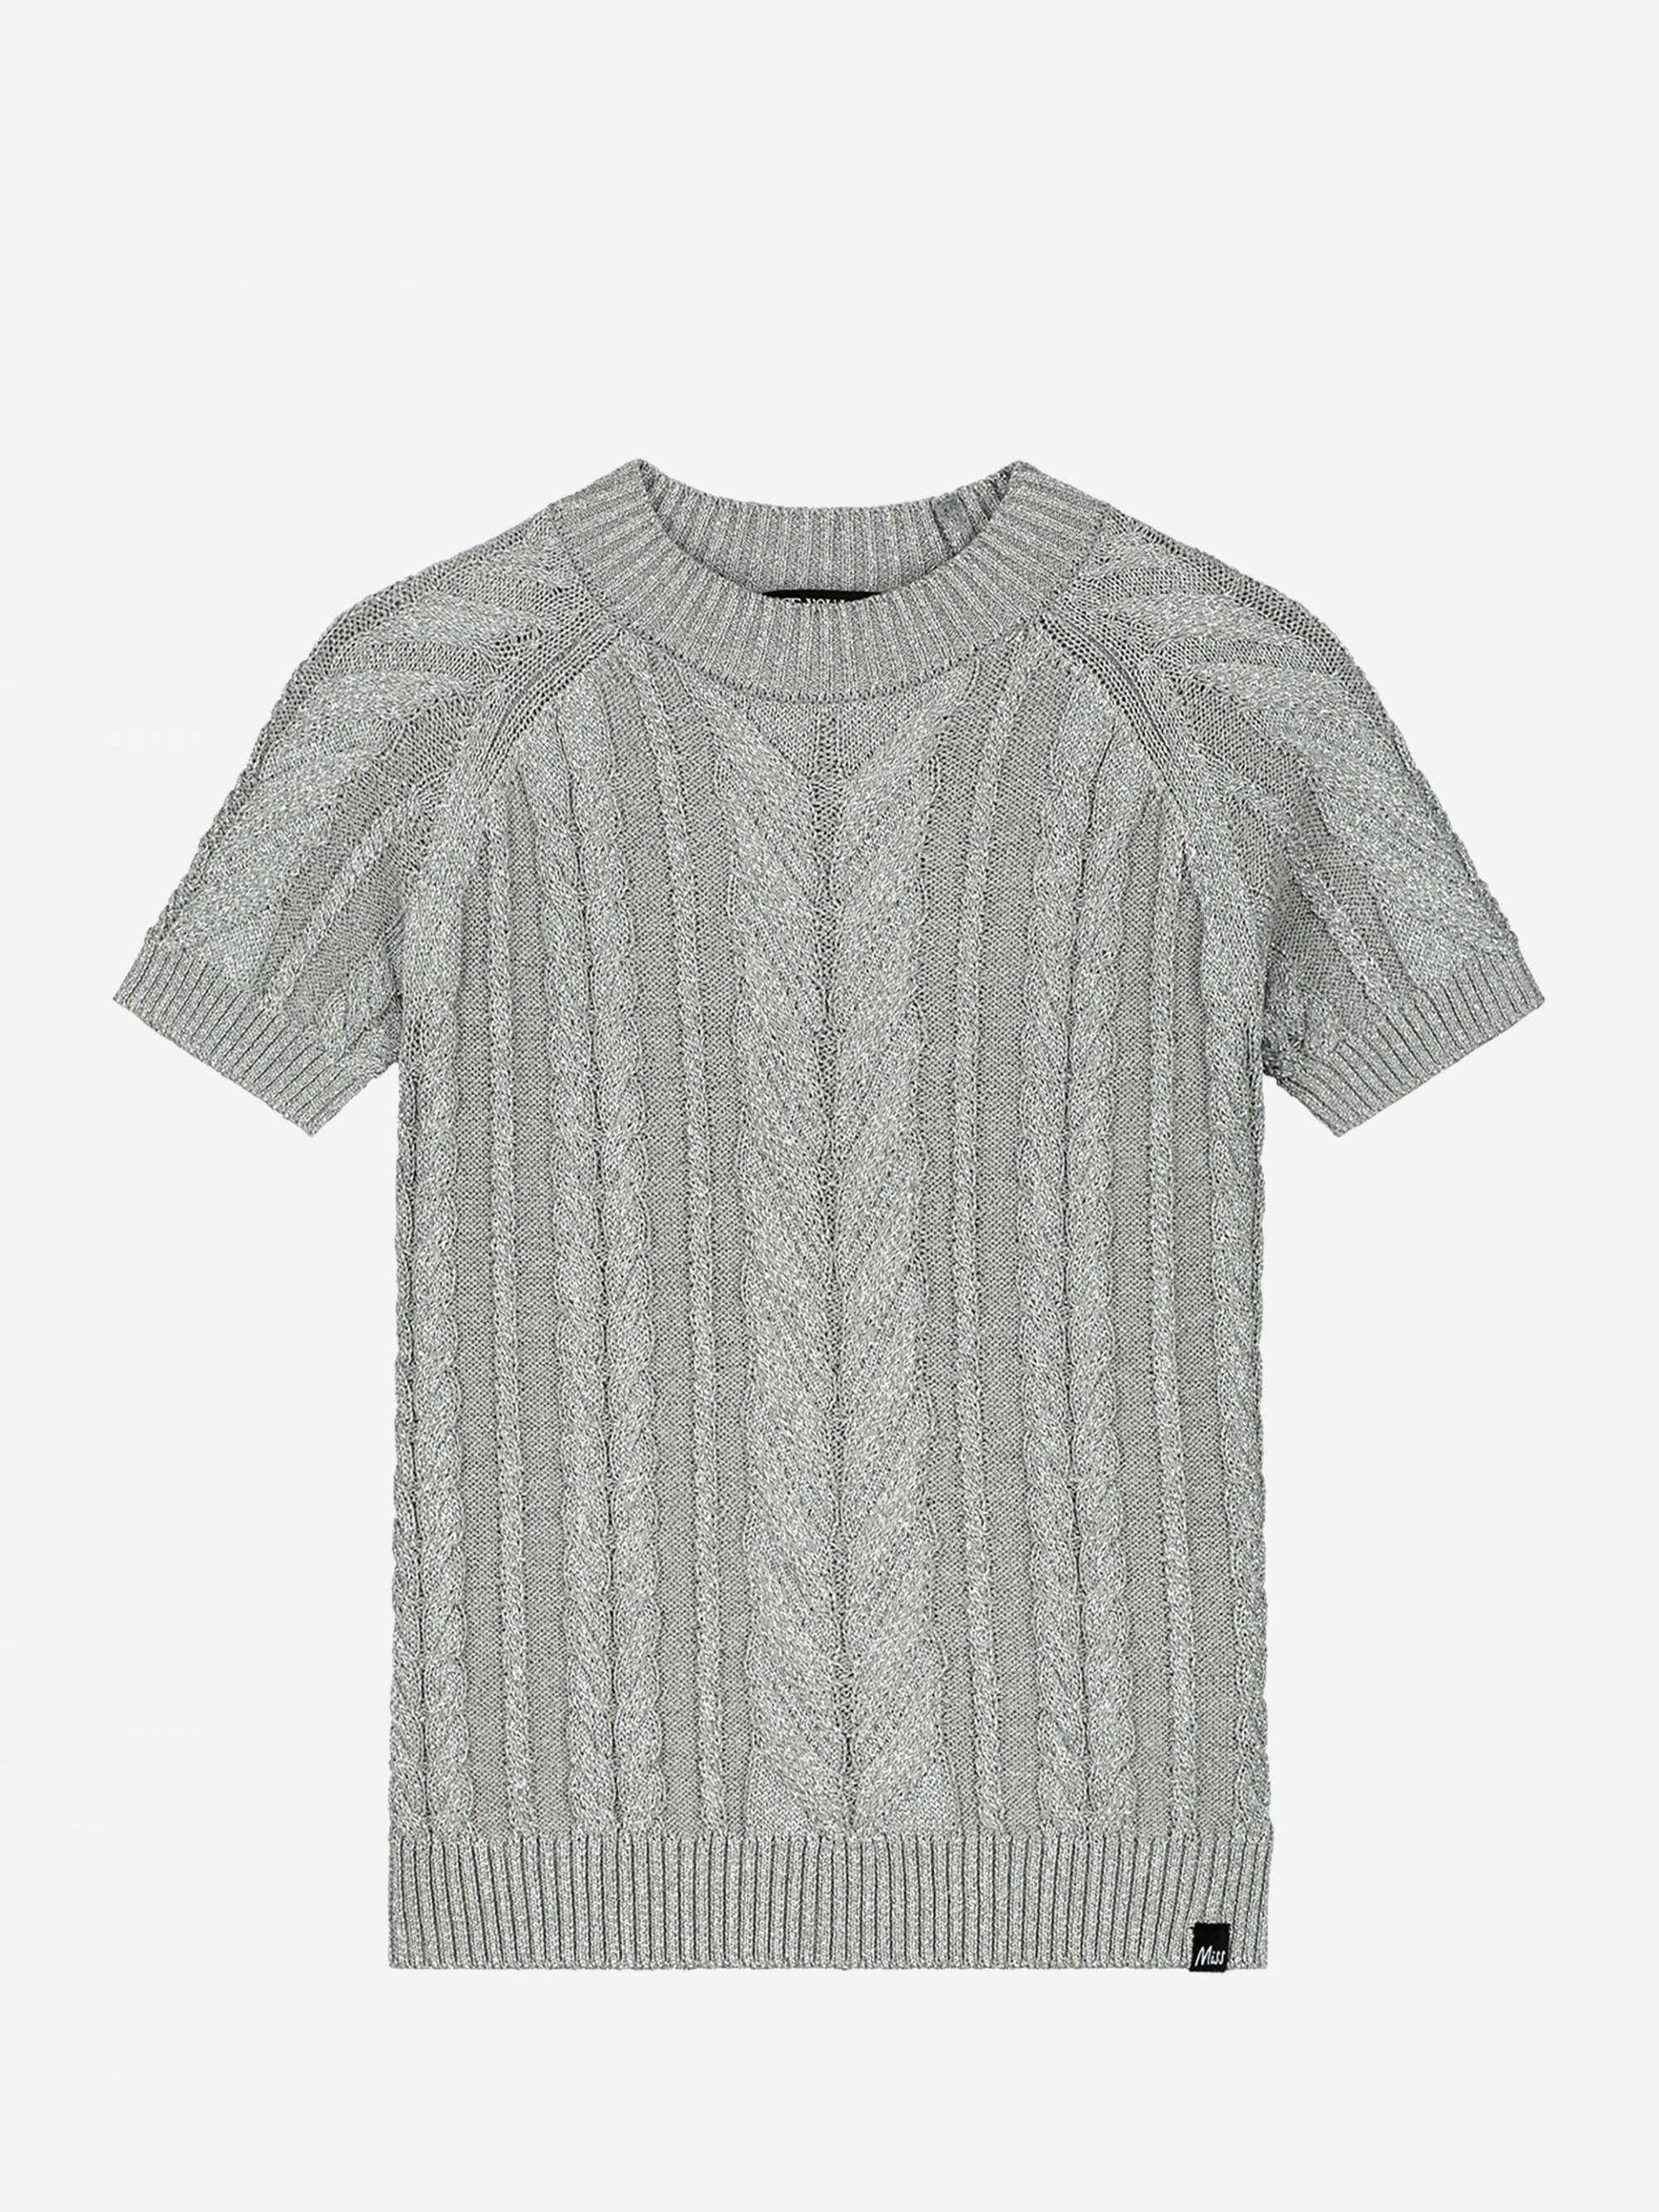 Metallic Cable Knit top with short sleeves 